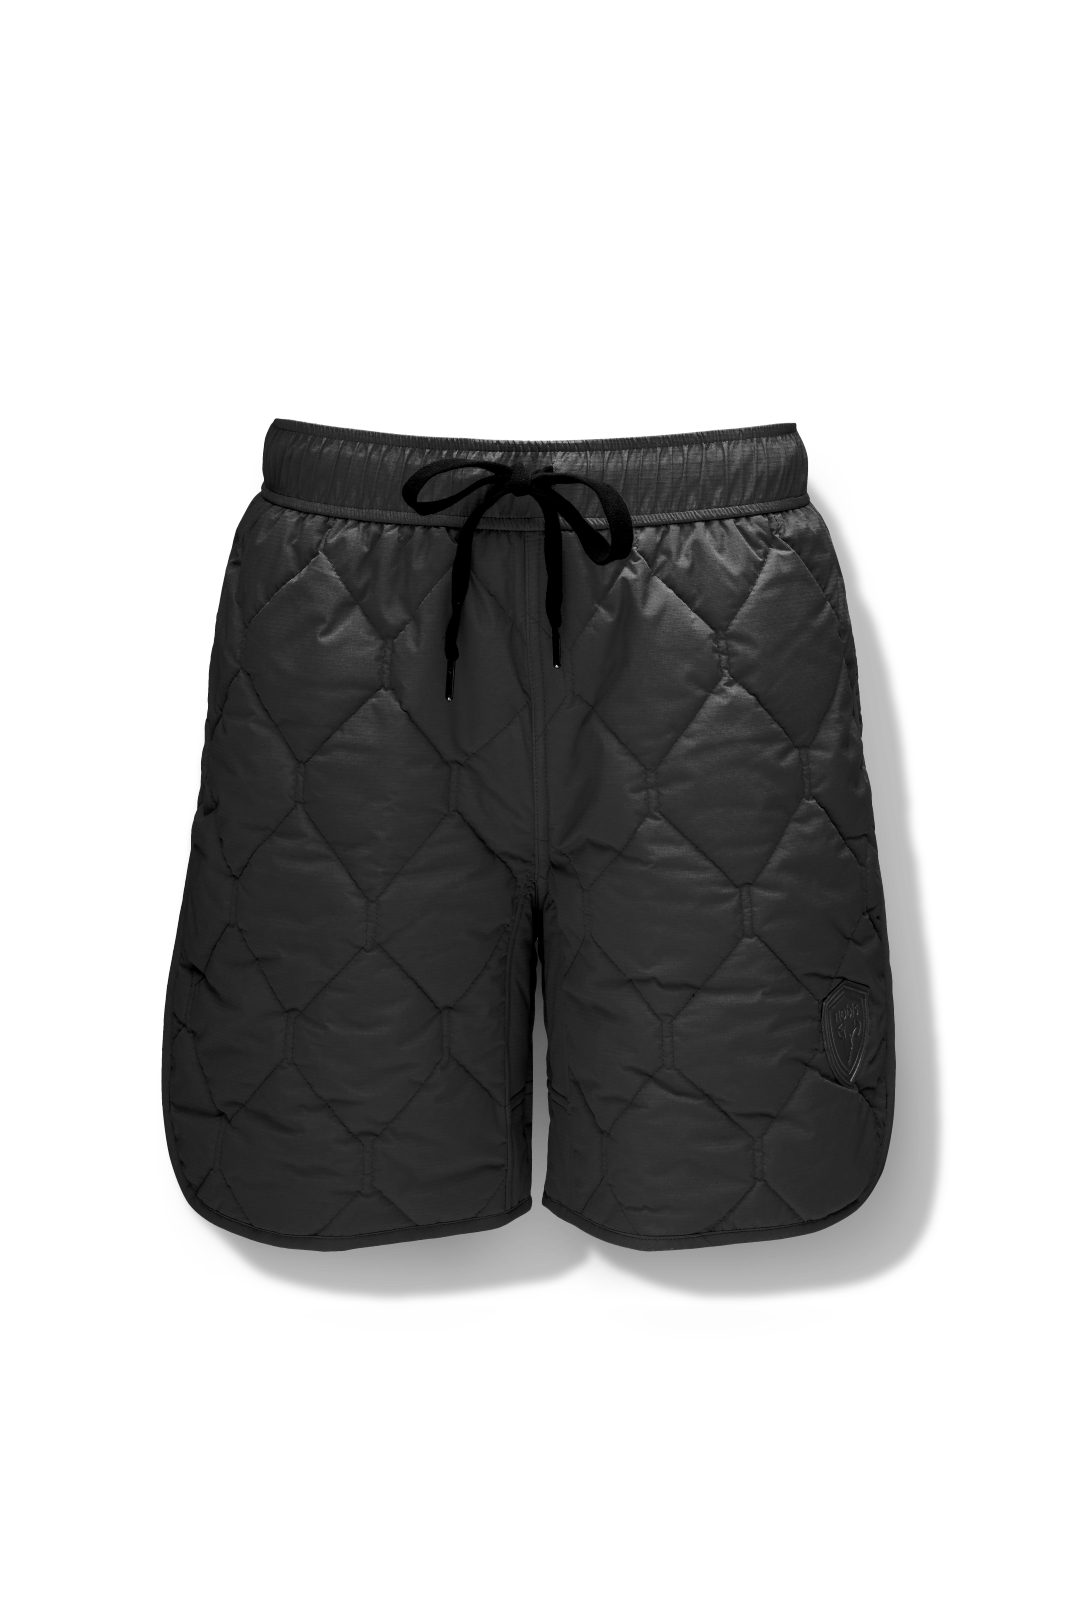 Curt Men's Performance Quilted Shorts at knee length, premium stretch nylon and stretch ripstop fabricaiton, premium 4-way stretch, water resistant Primaloft Gold Insulation Active+, side seam pockets, exteriror back pocket, elasticized waist with drawcords, and notch detailing at side seams, in Black